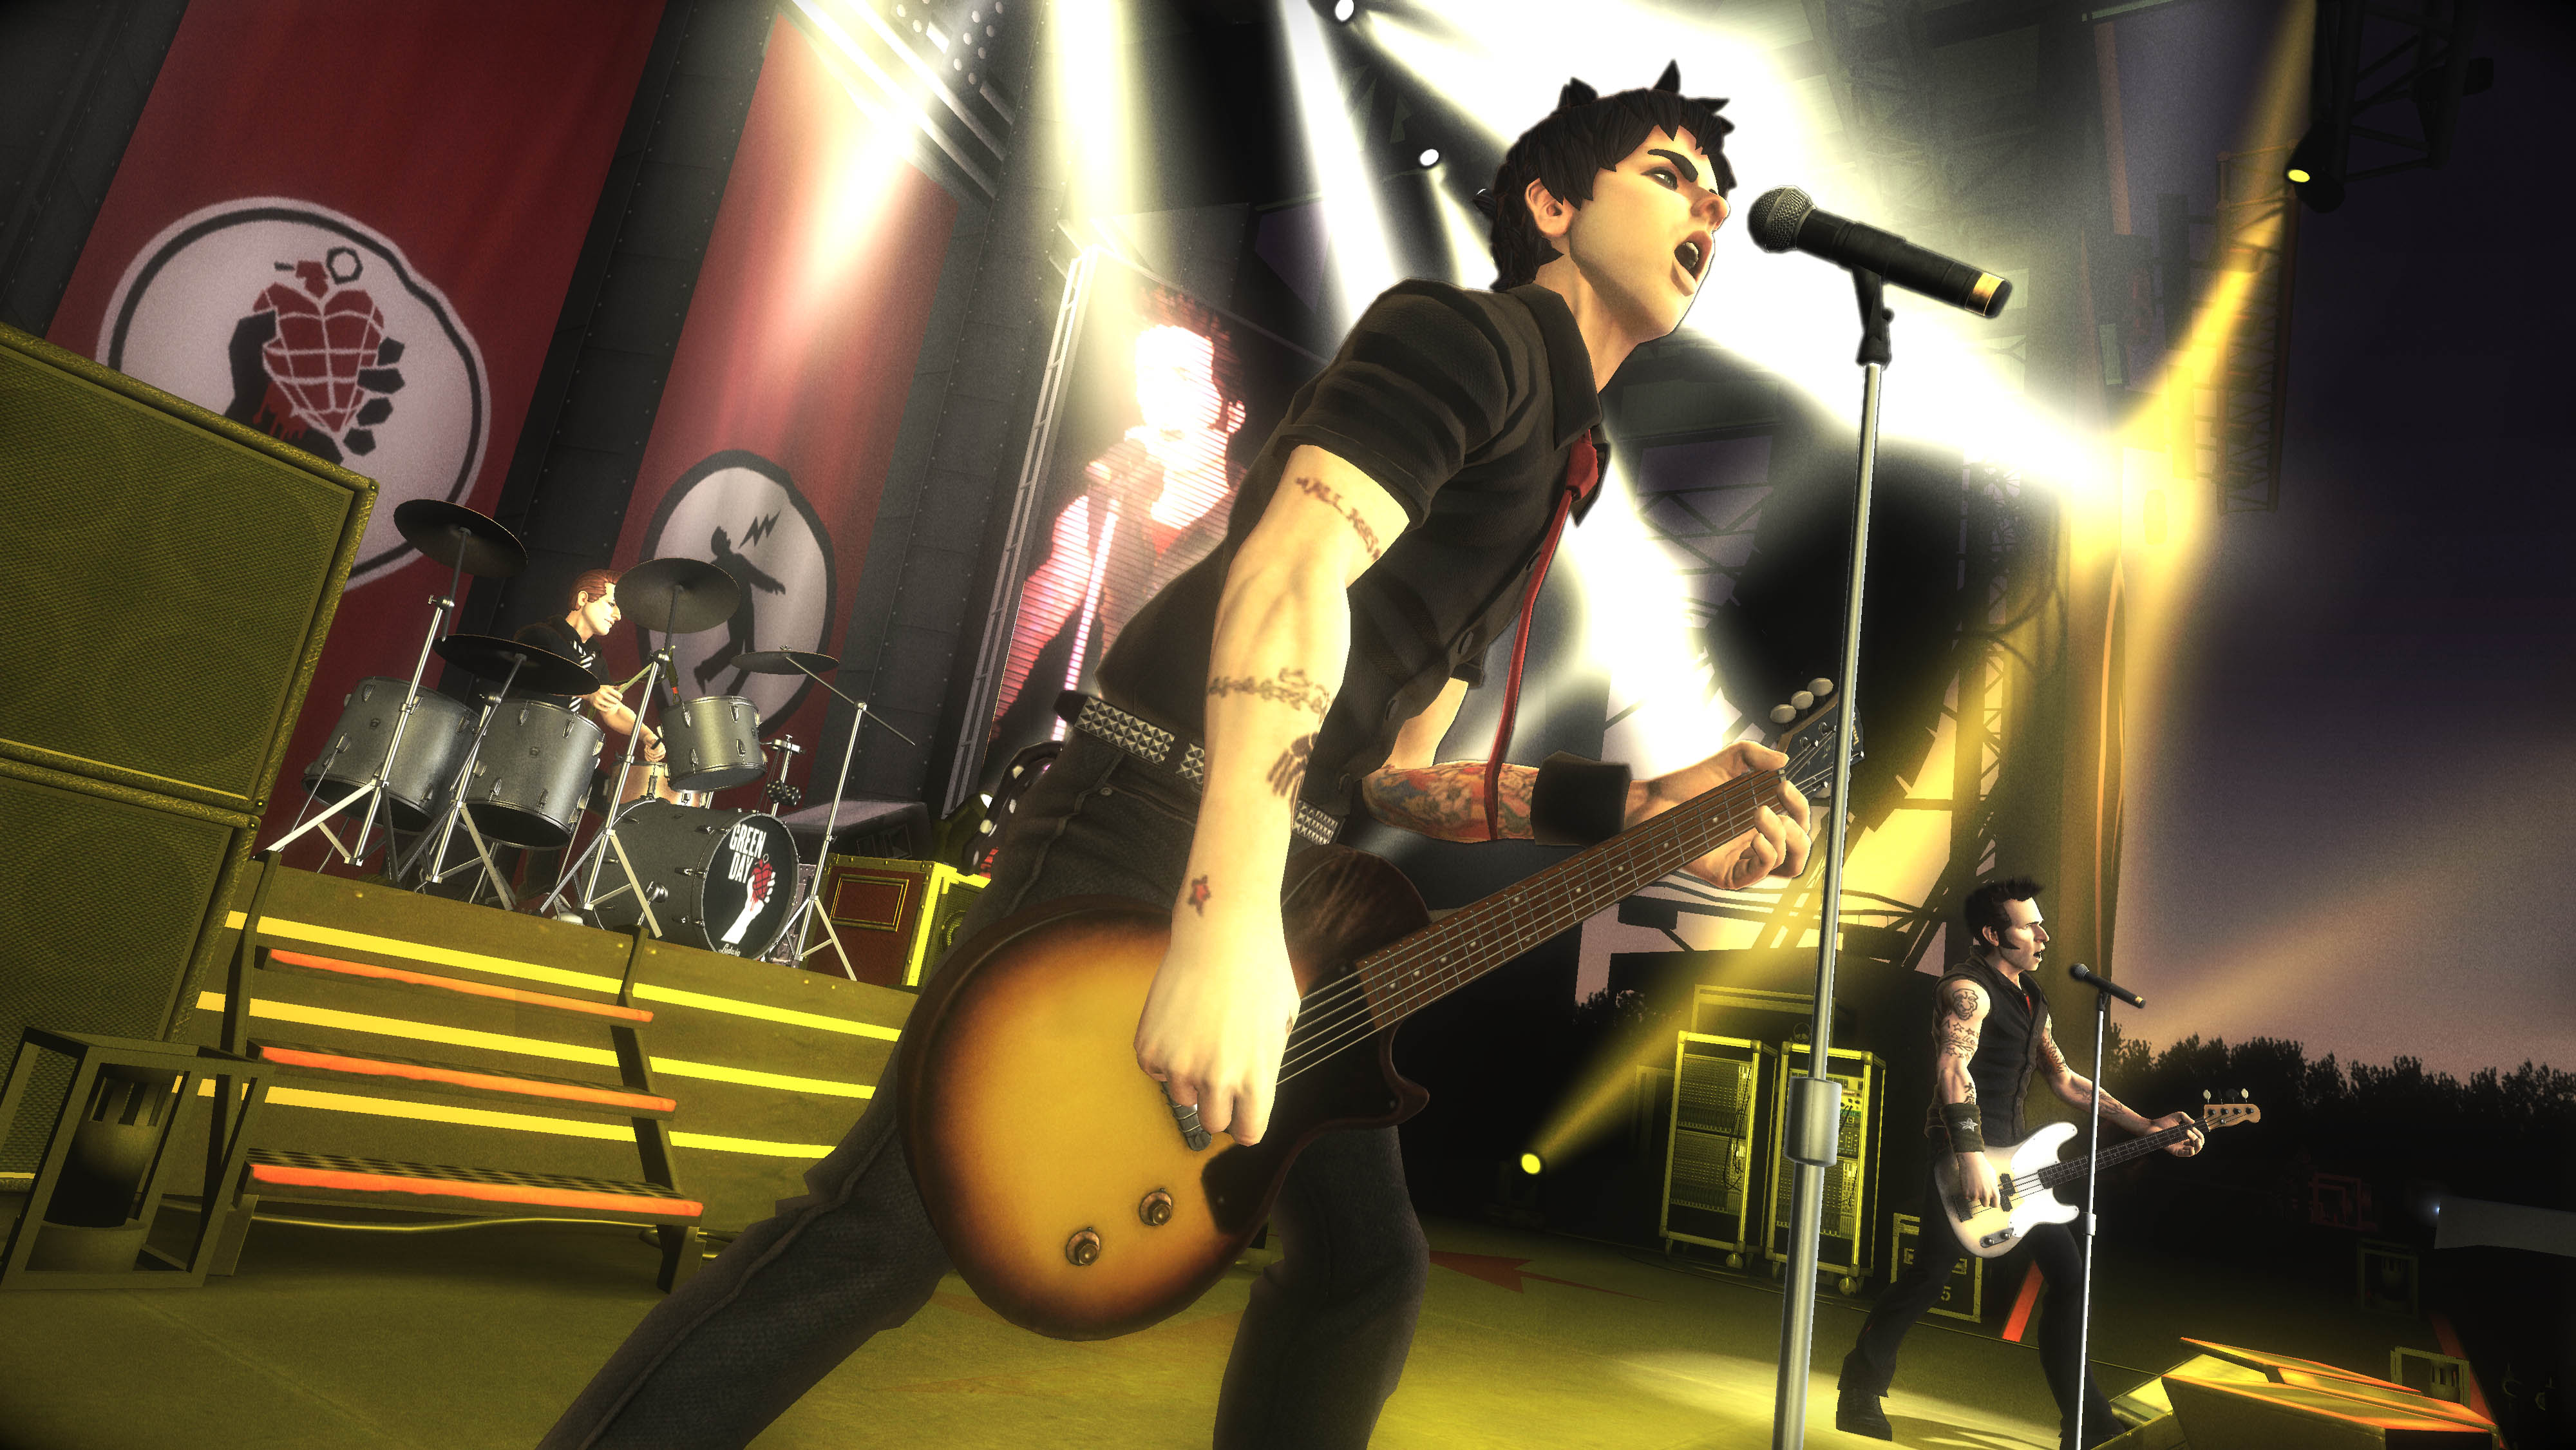 Greenday Rockband Backgrounds, Compatible - PC, Mobile, Gadgets| 4000x2251 px